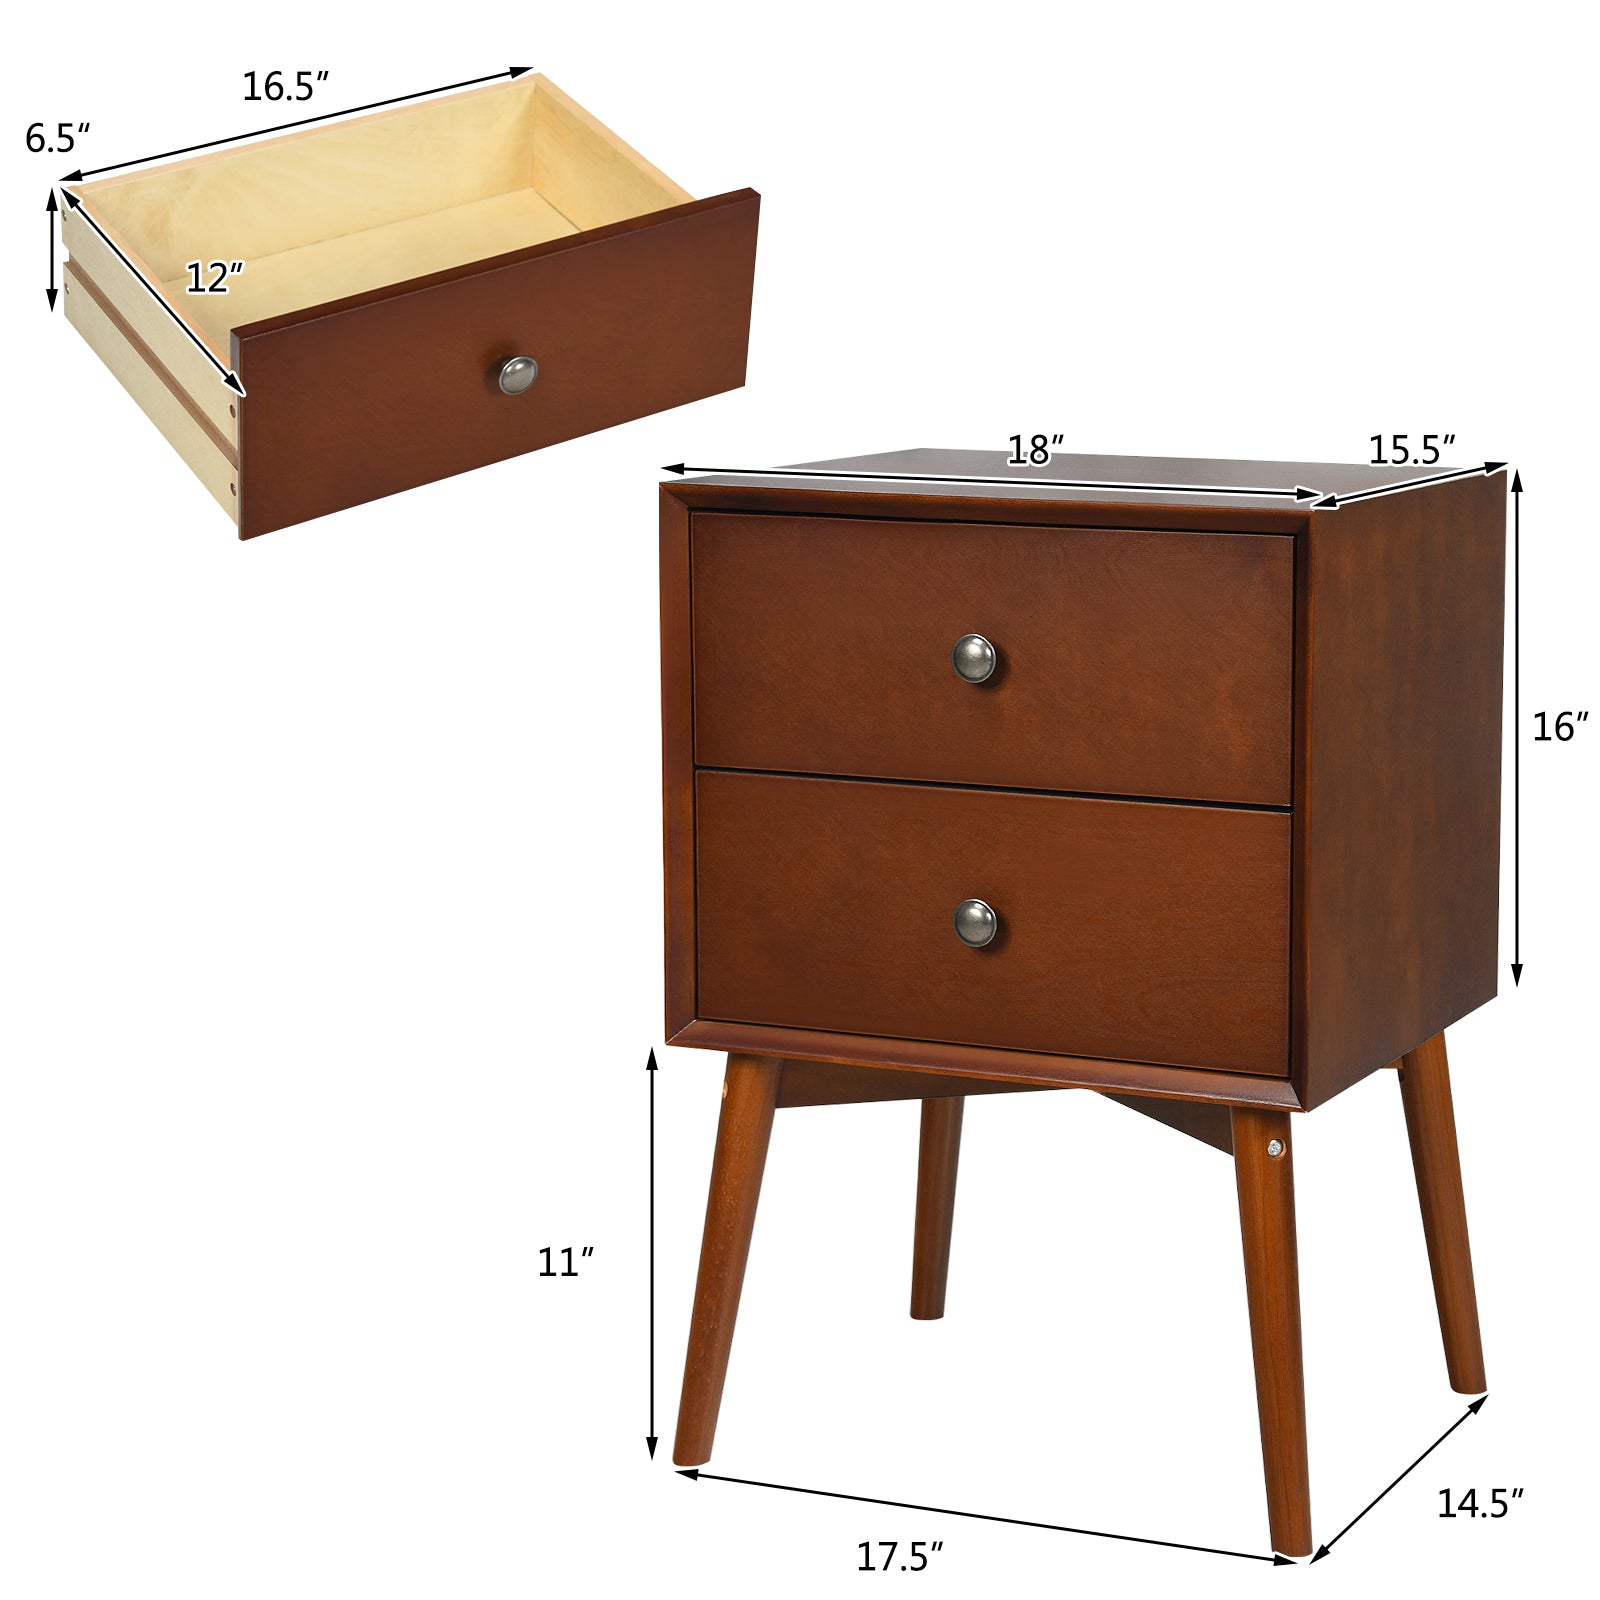 Giantex End Table with Drawers and Metal Knobs